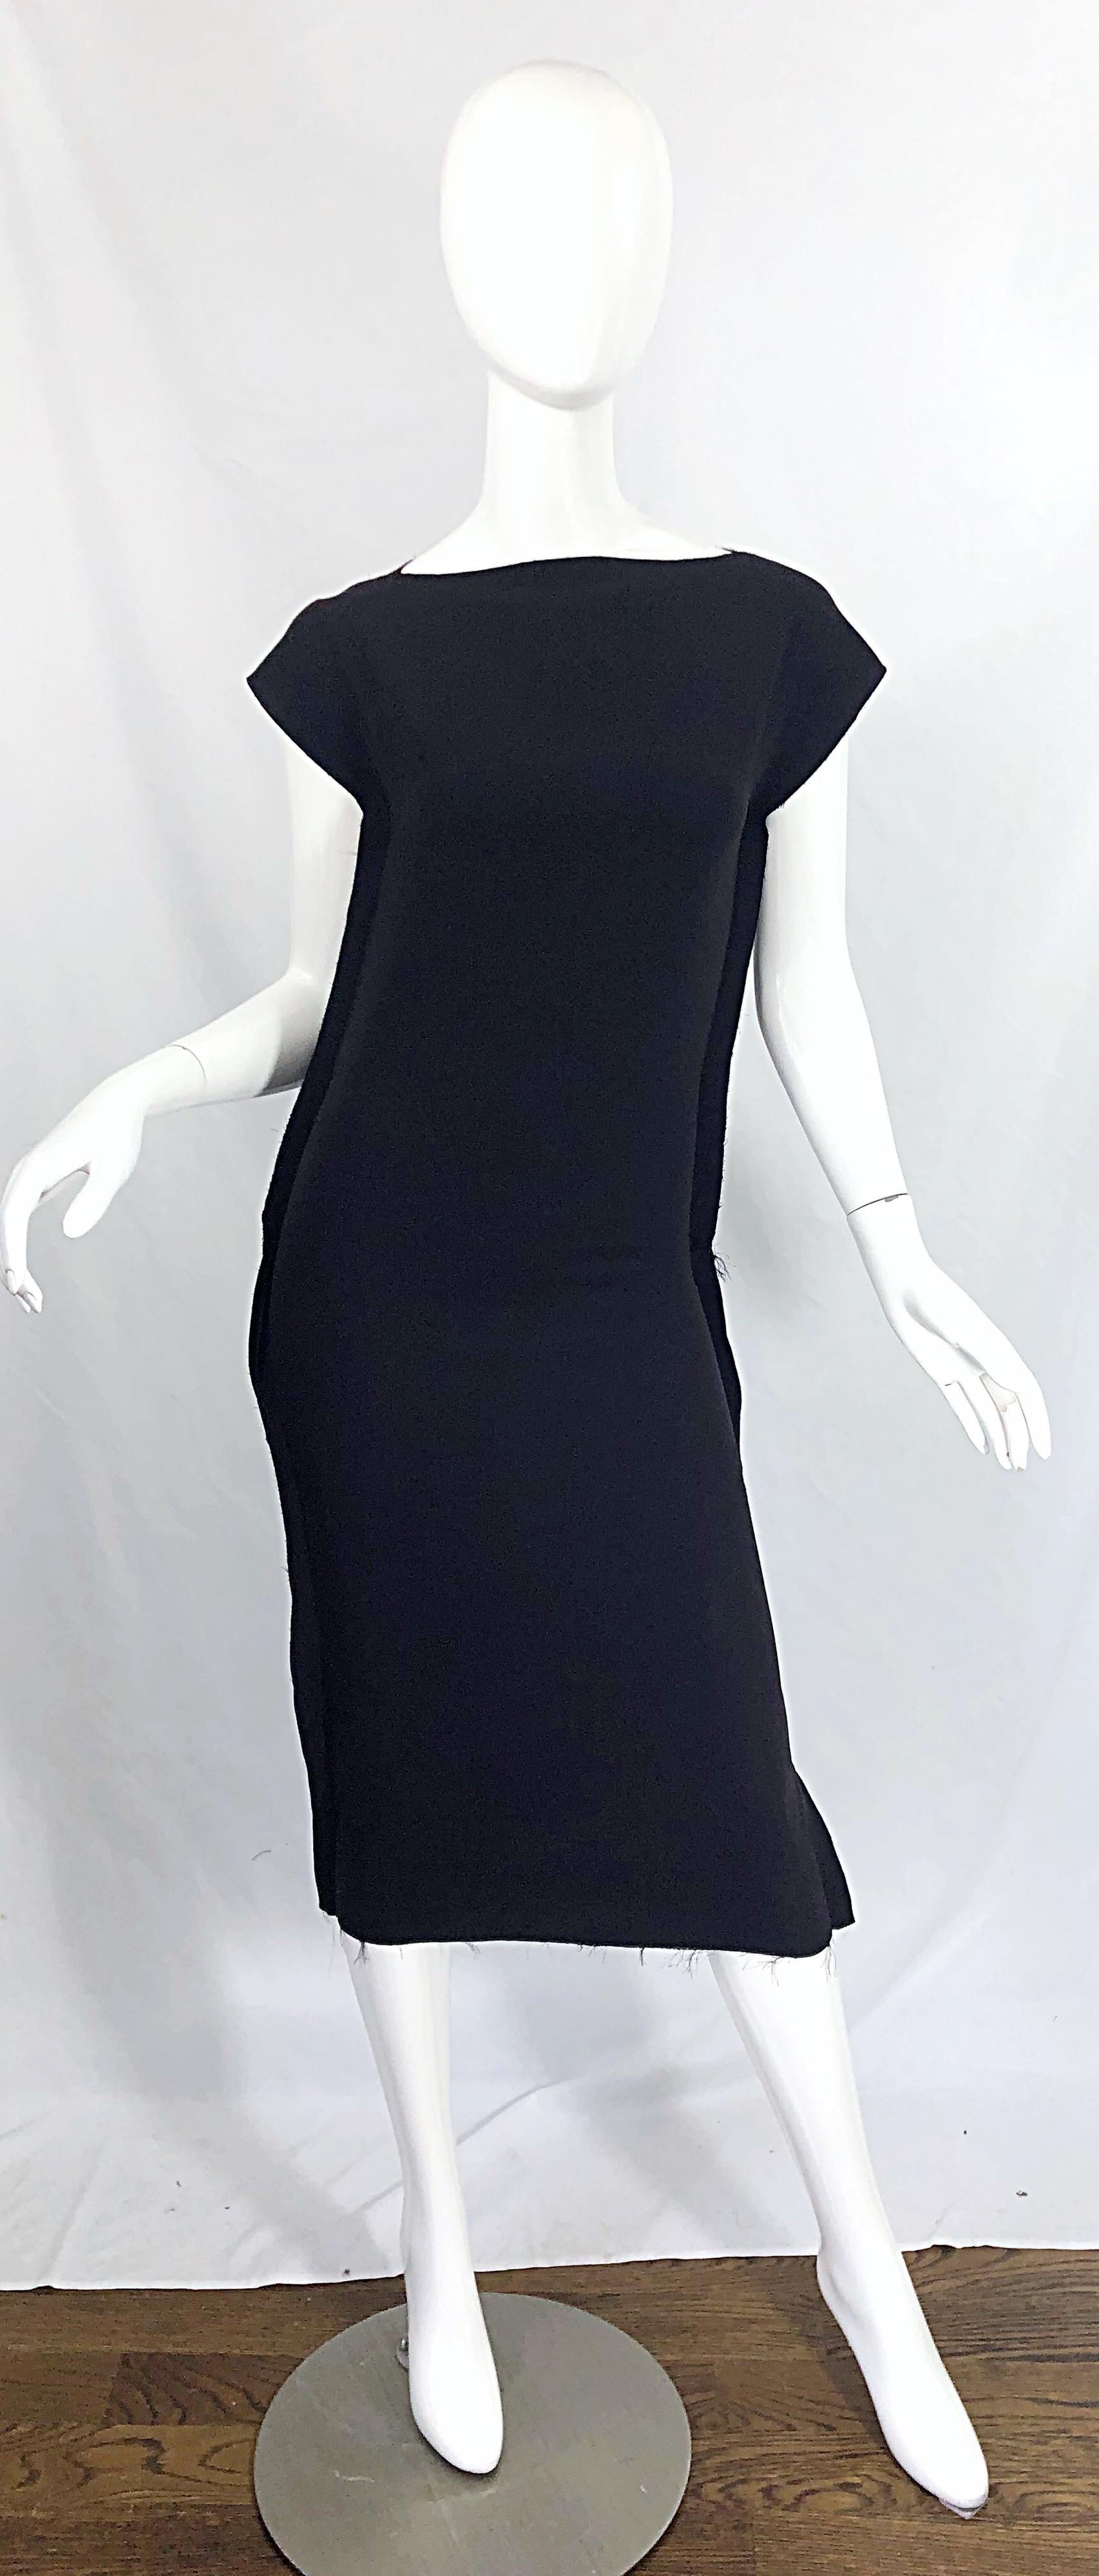 Such an amazing take on the little black dress ! CALVIN KLEIN COLLECTION black jersey 'Inside Out' short sleeve midi dress ! Features unfinished seams that look like they are inside out. Hidden zipper up the back with hook-and-eye closure. The